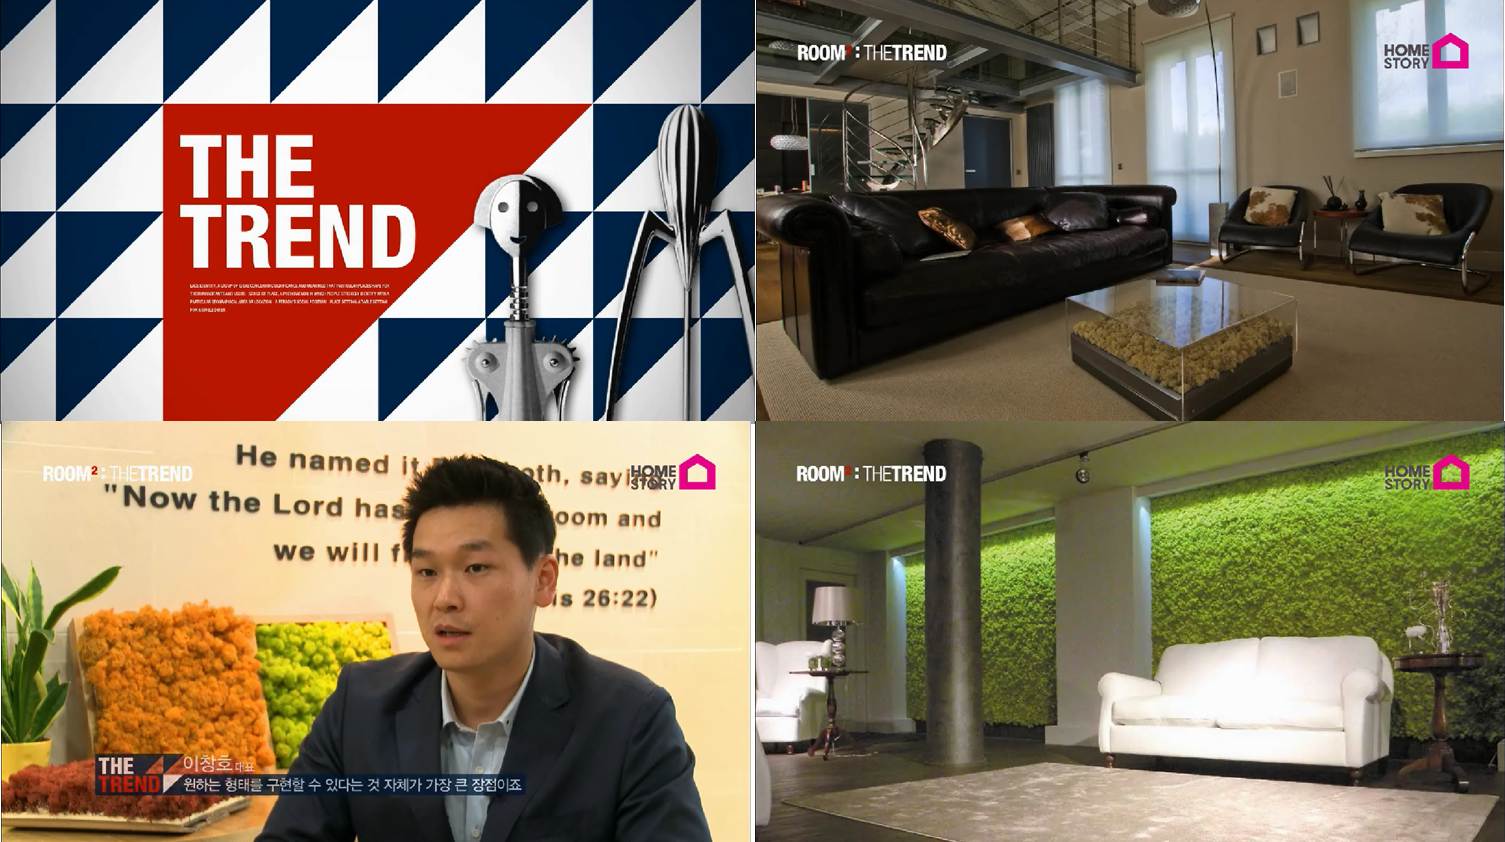 Mosstile featured on Living Trend TV Show